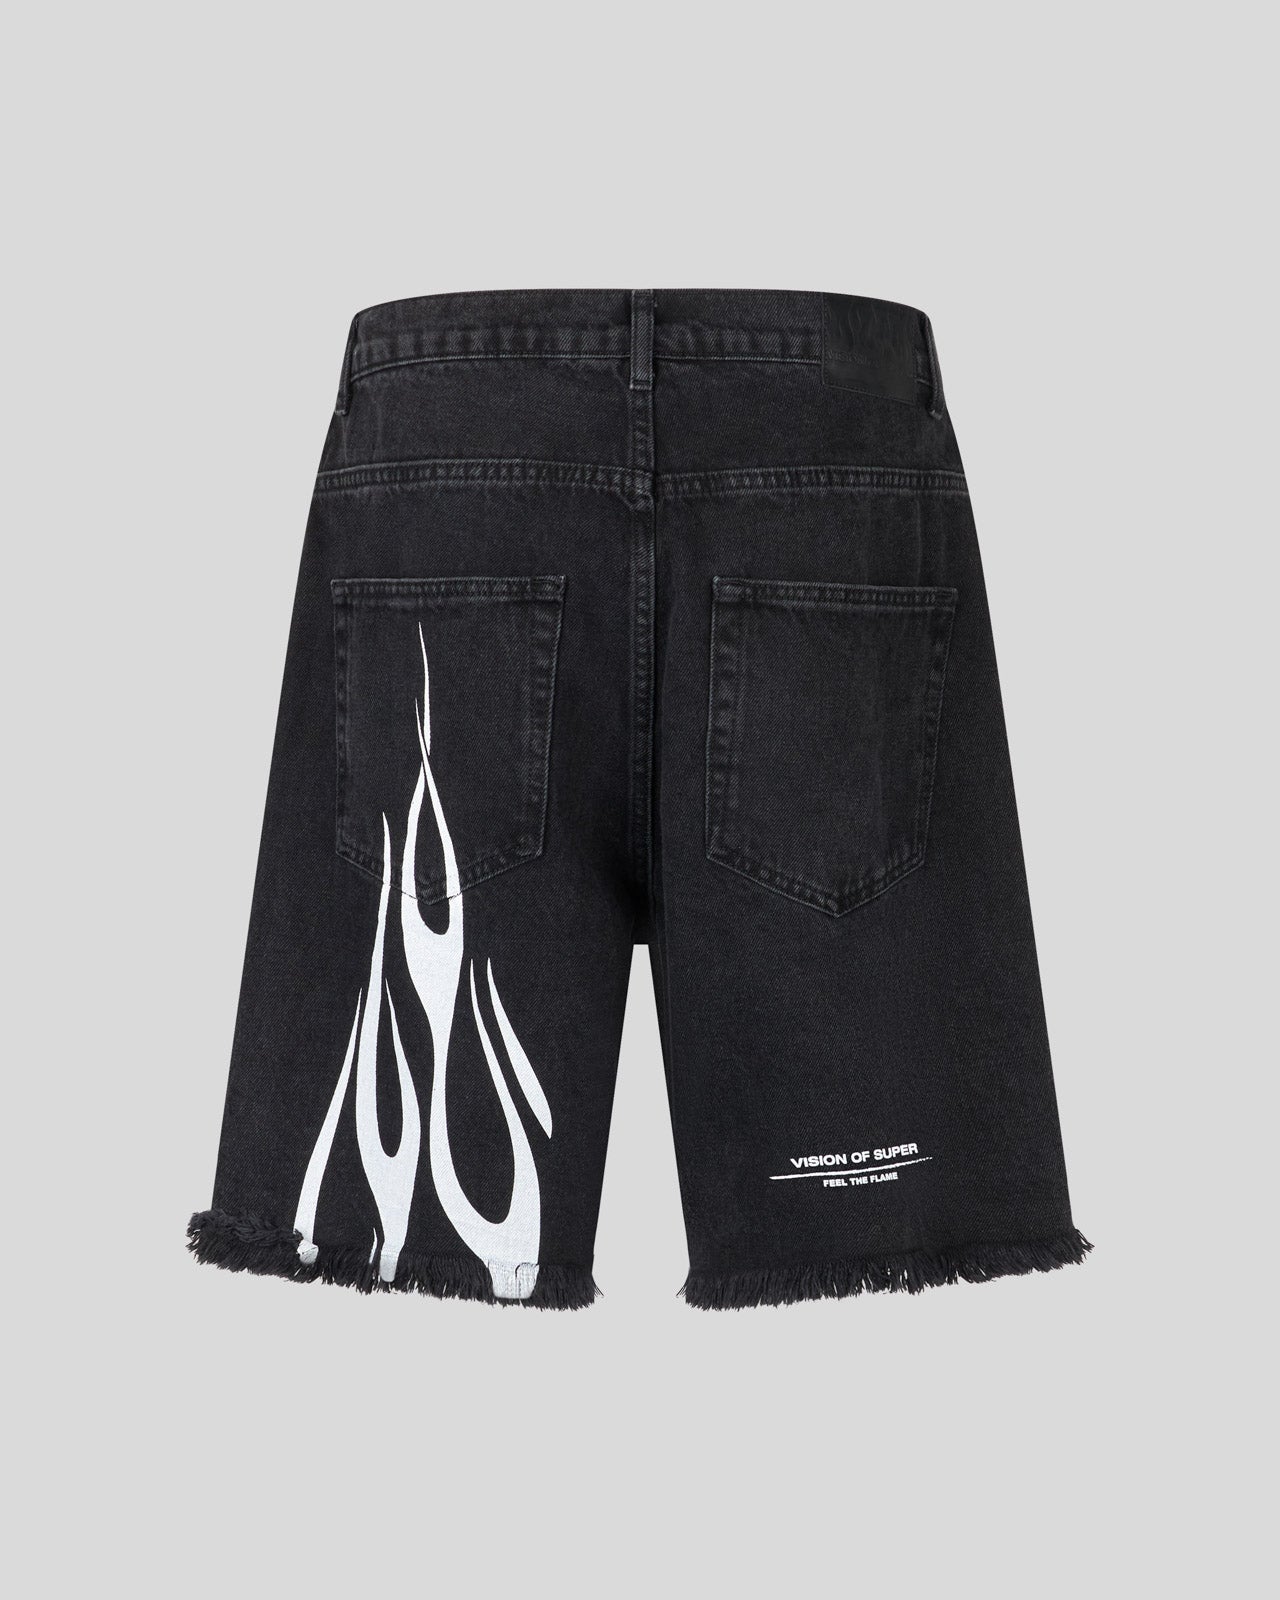 BLACK DENIM SHORTS WITH PRINTED FLAMES AND LOGO